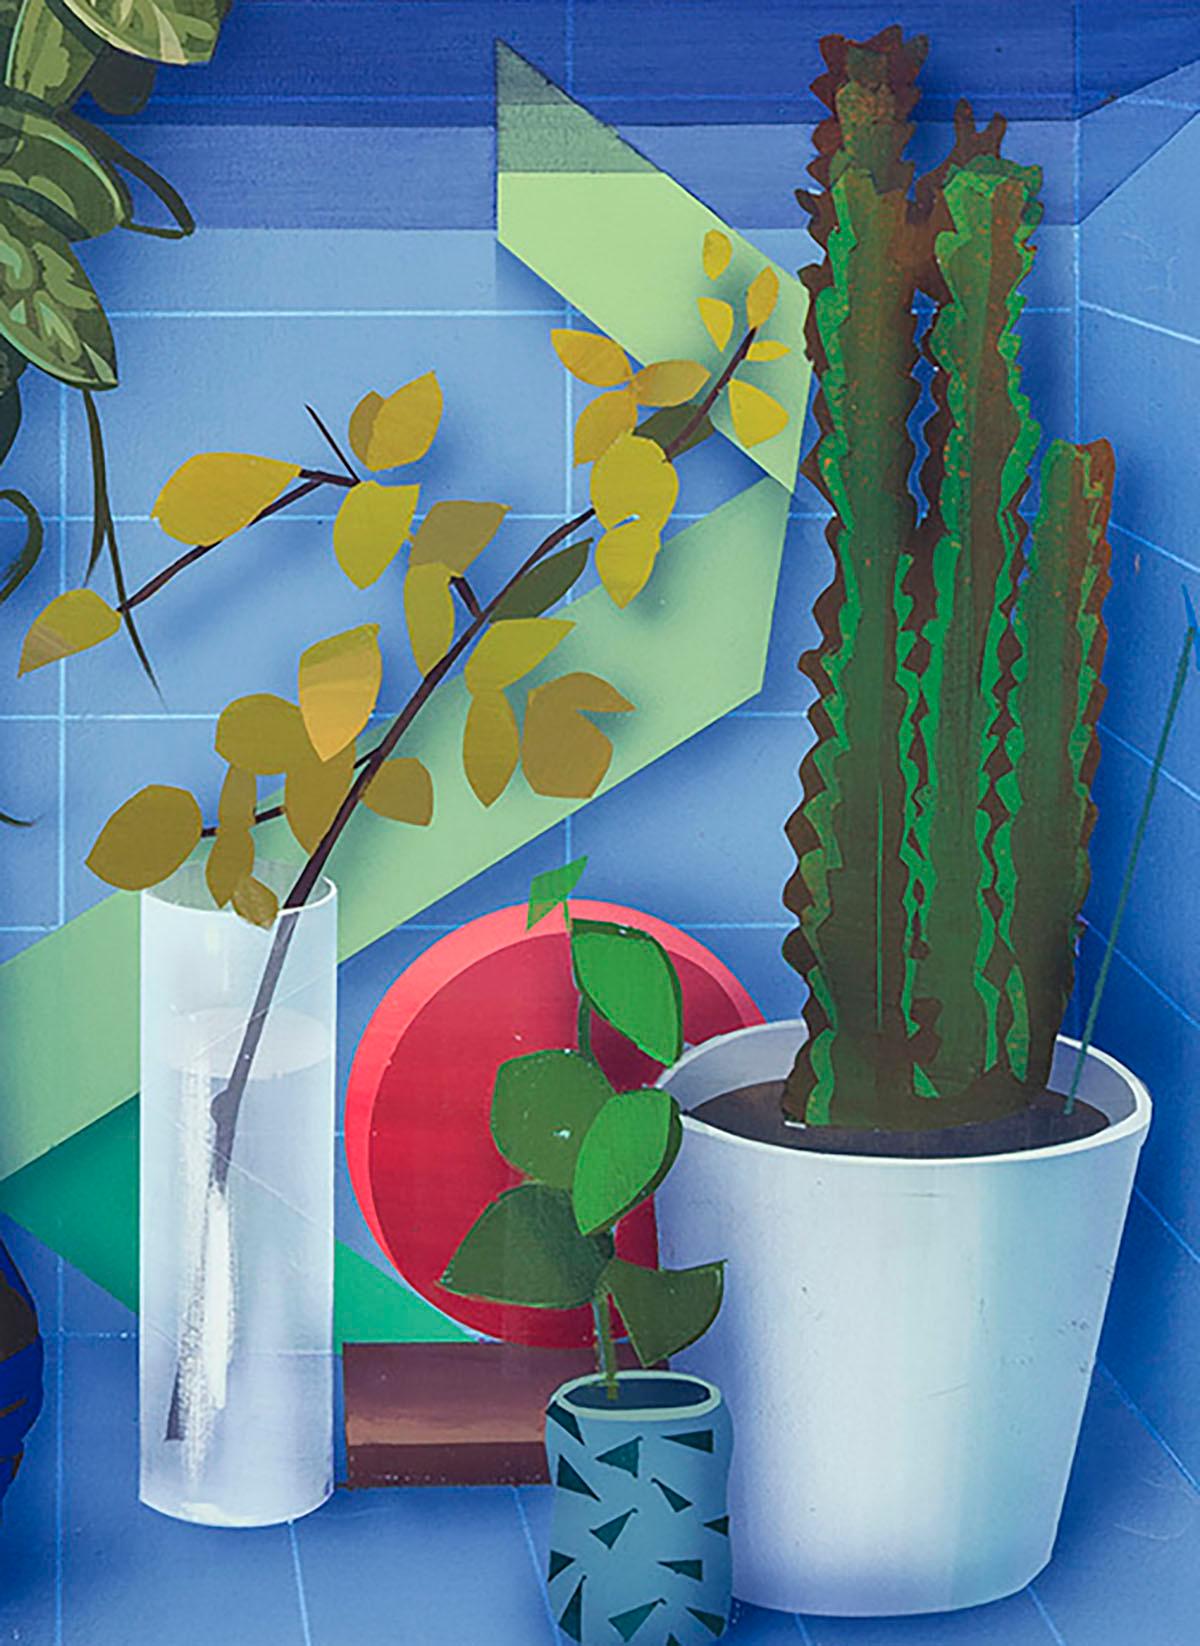 Employing paint, collage and silkscreen to masterful effect, Robert Minervini’s still life paintings are beautiful and dystopian. House plants and succulents populate shelves littered with the detritus of Eastern and Western Civilizations, begging